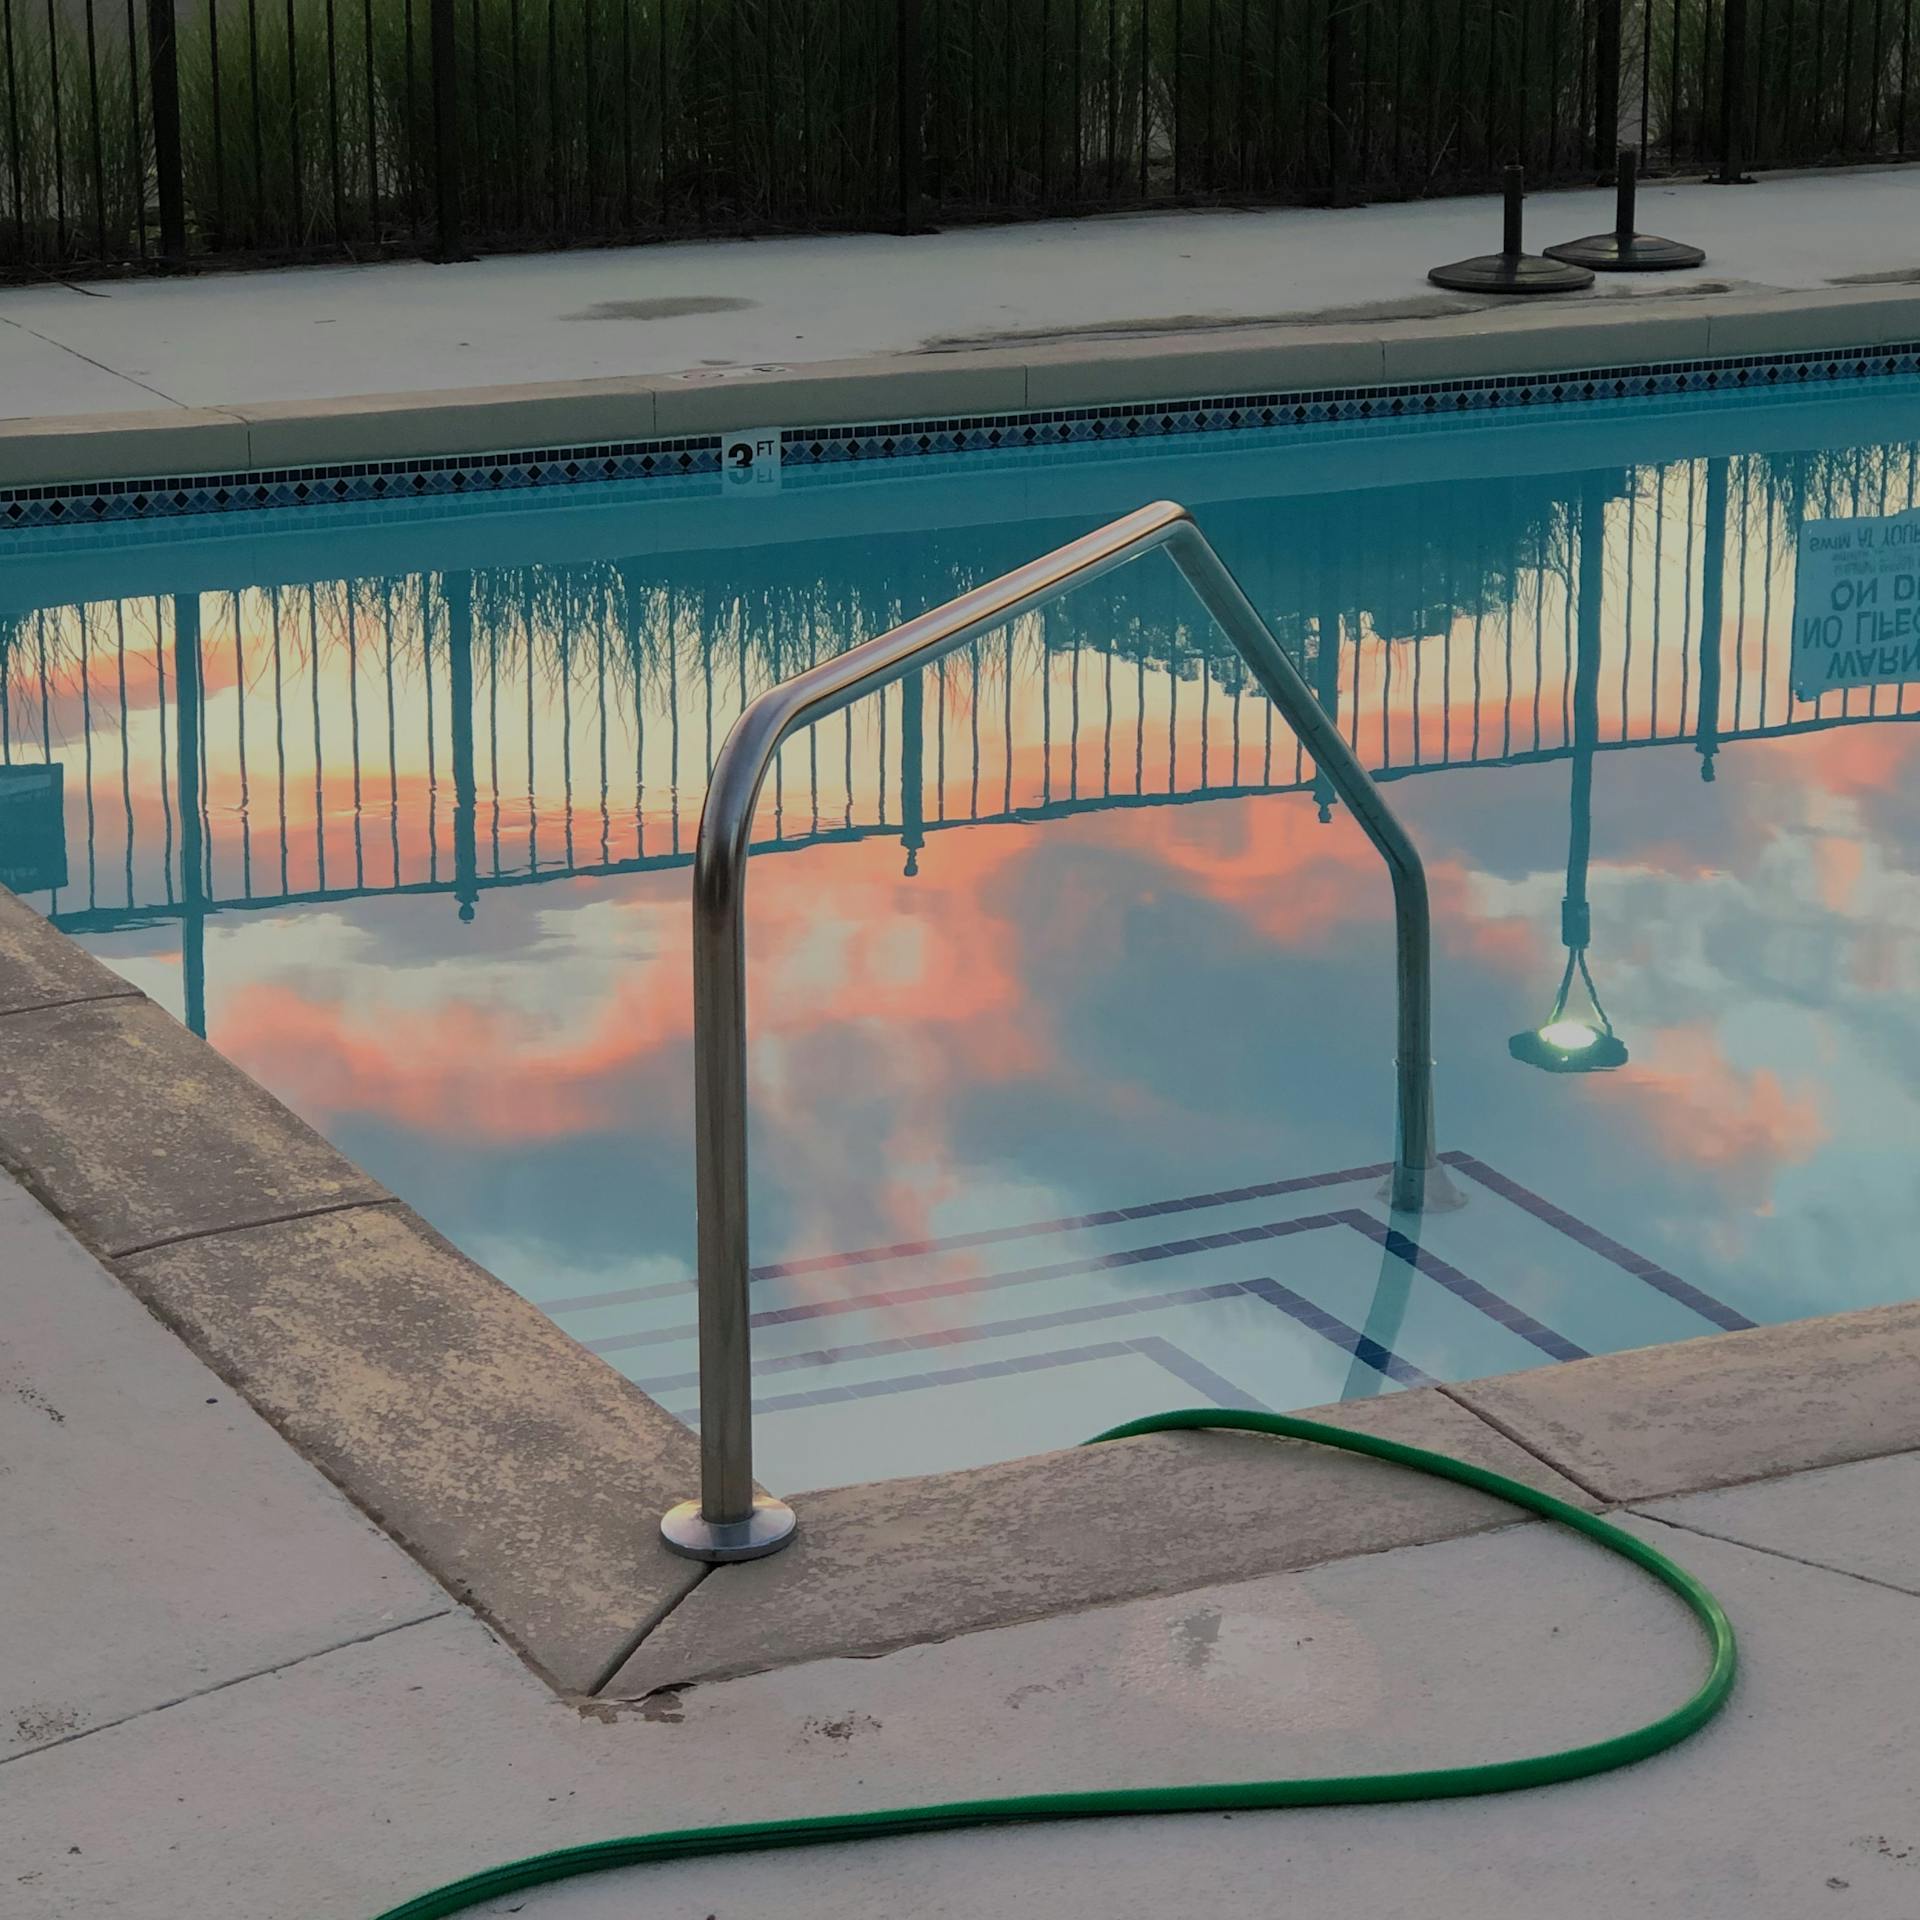 Empty small swimming pool with metal handrail and hose in backyard next to fence in evening